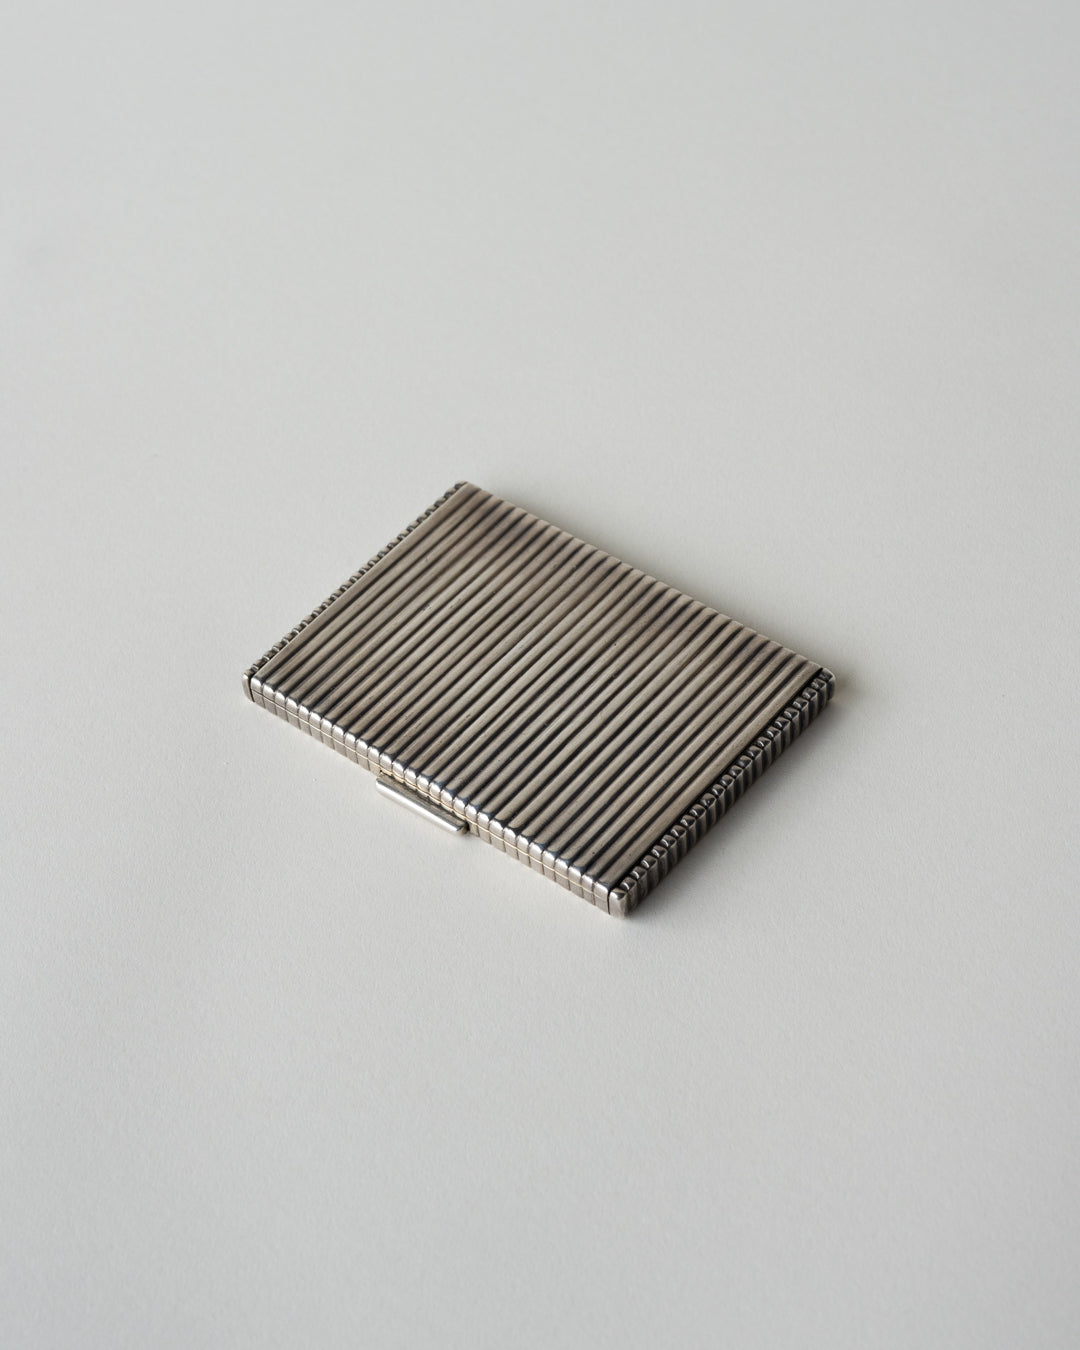 Cigarette Case from D. Semiatycz, Poland, 1930s for sale at Pamono